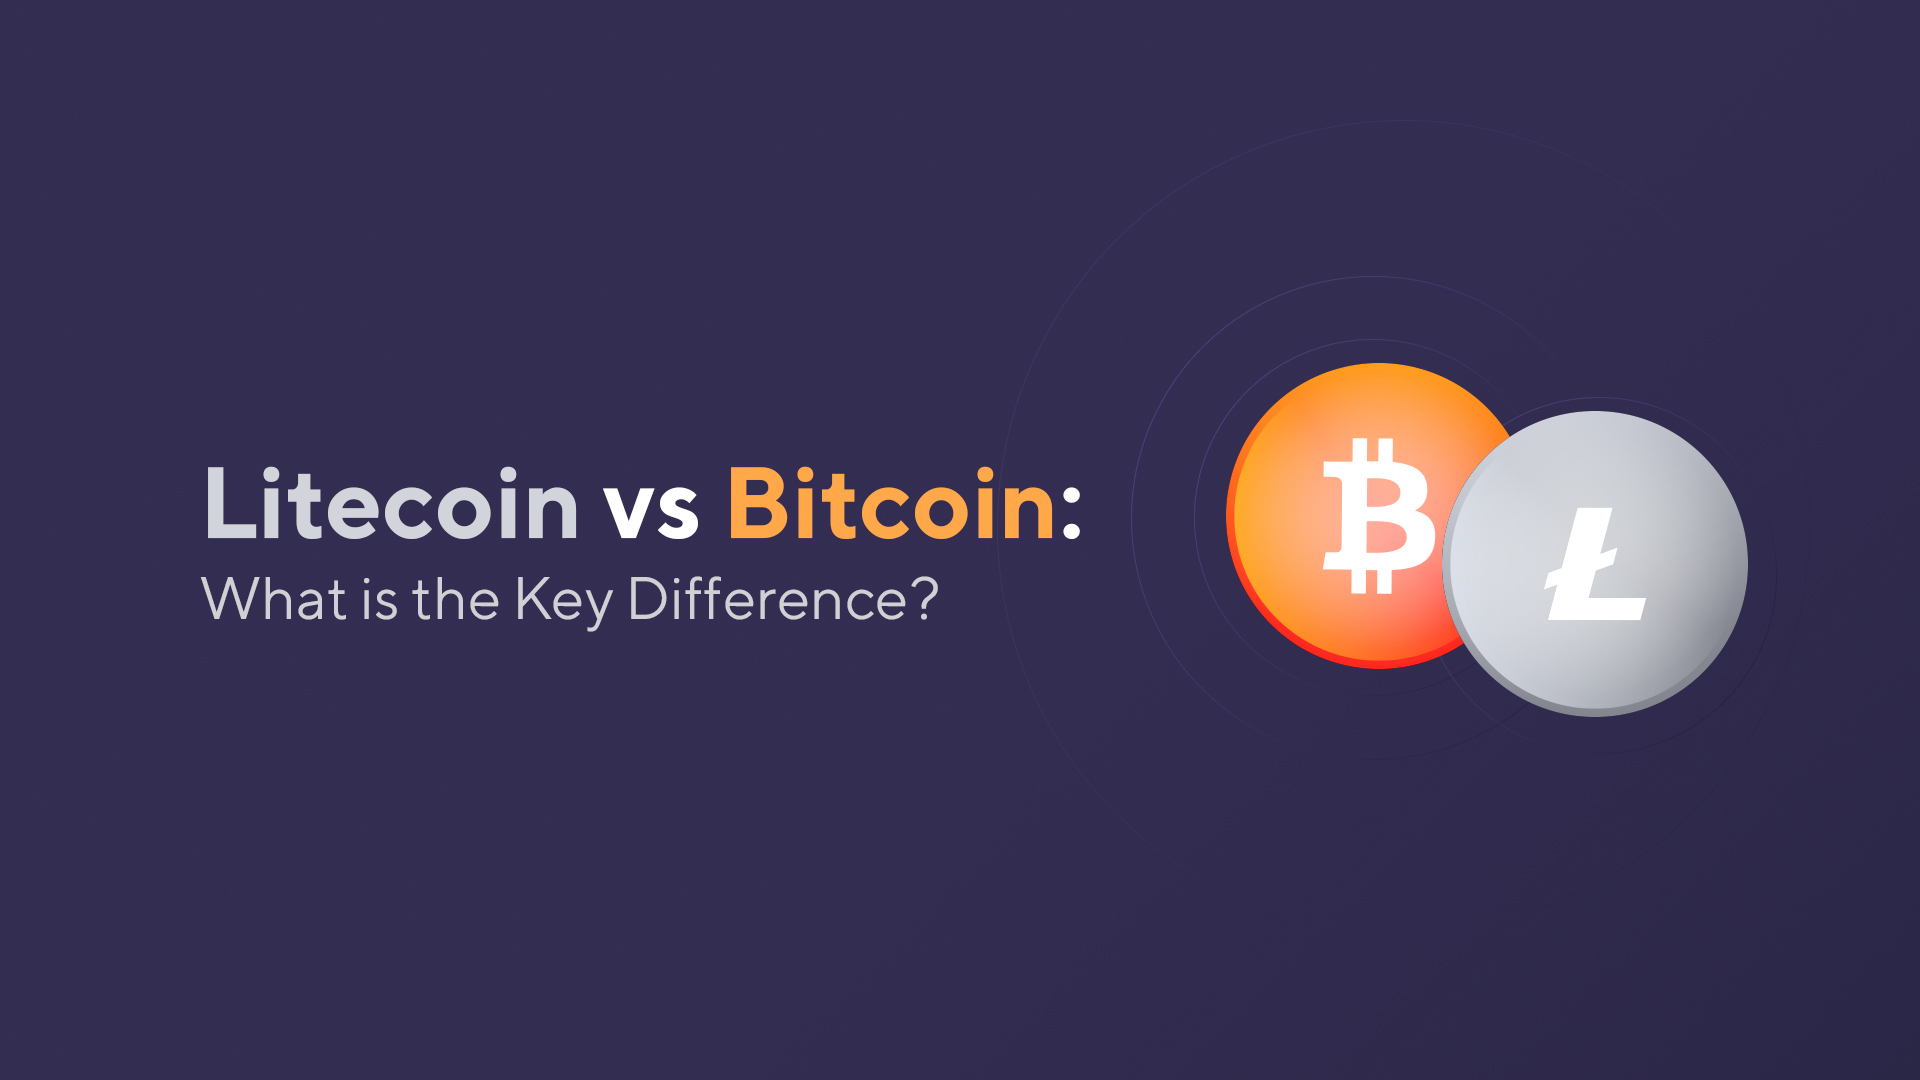 Litecoin vs Bitcoin: What is the Key Difference?